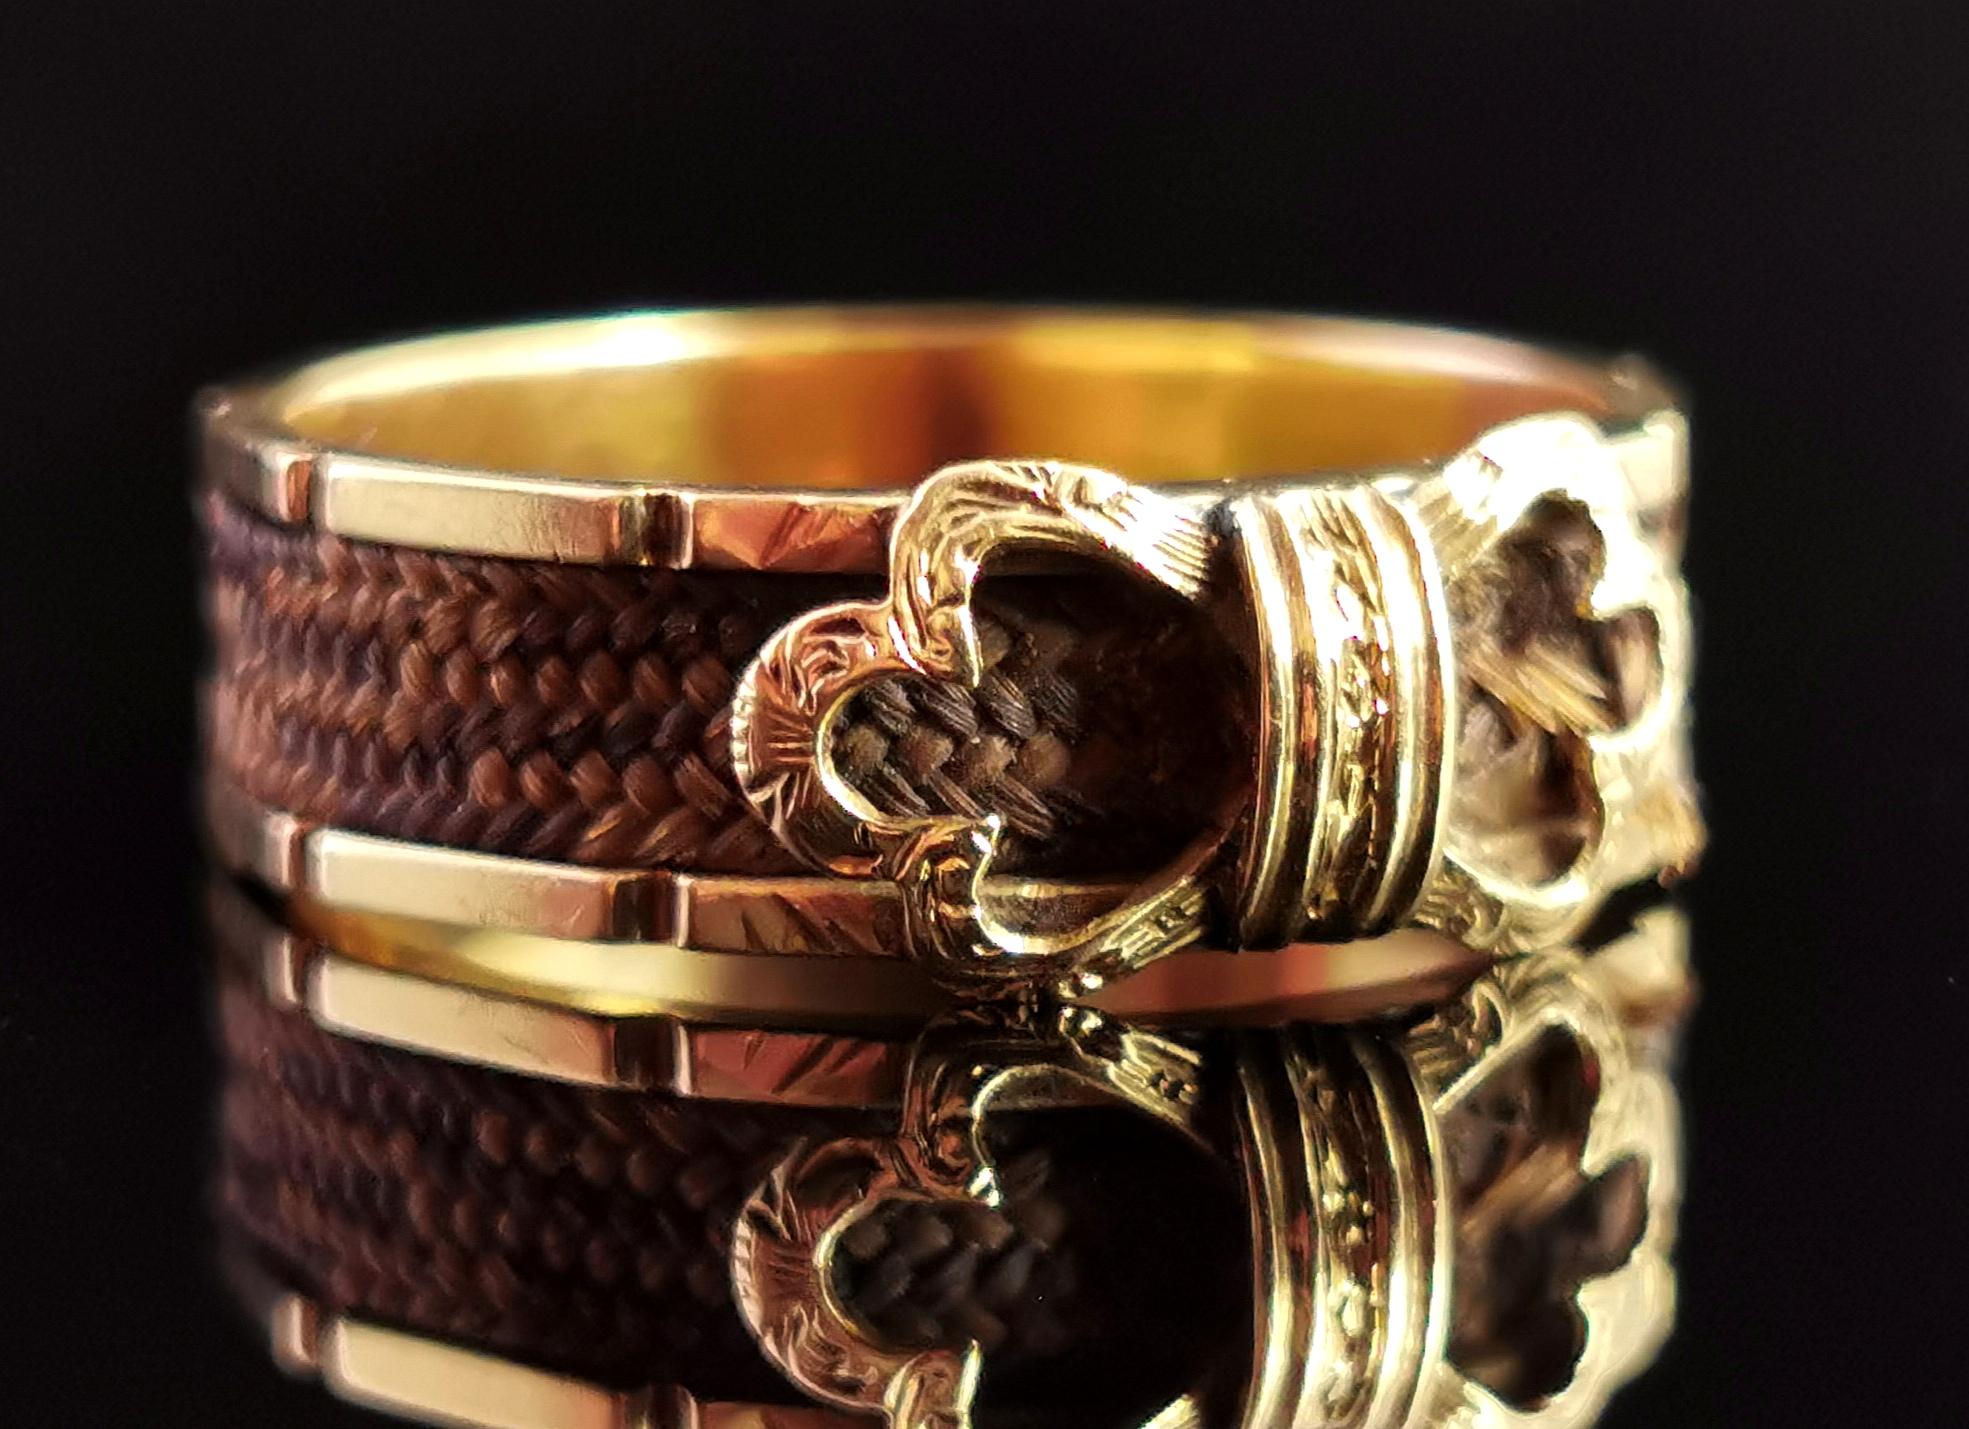 A stunning antique Victorian mourning ring.

Rich 15 karat yellow gold band with a shaped rim and a beautiful gold bow design front, the bow is lightly engraved.

The gold band is covered with light brown woven hair which stretches all the way